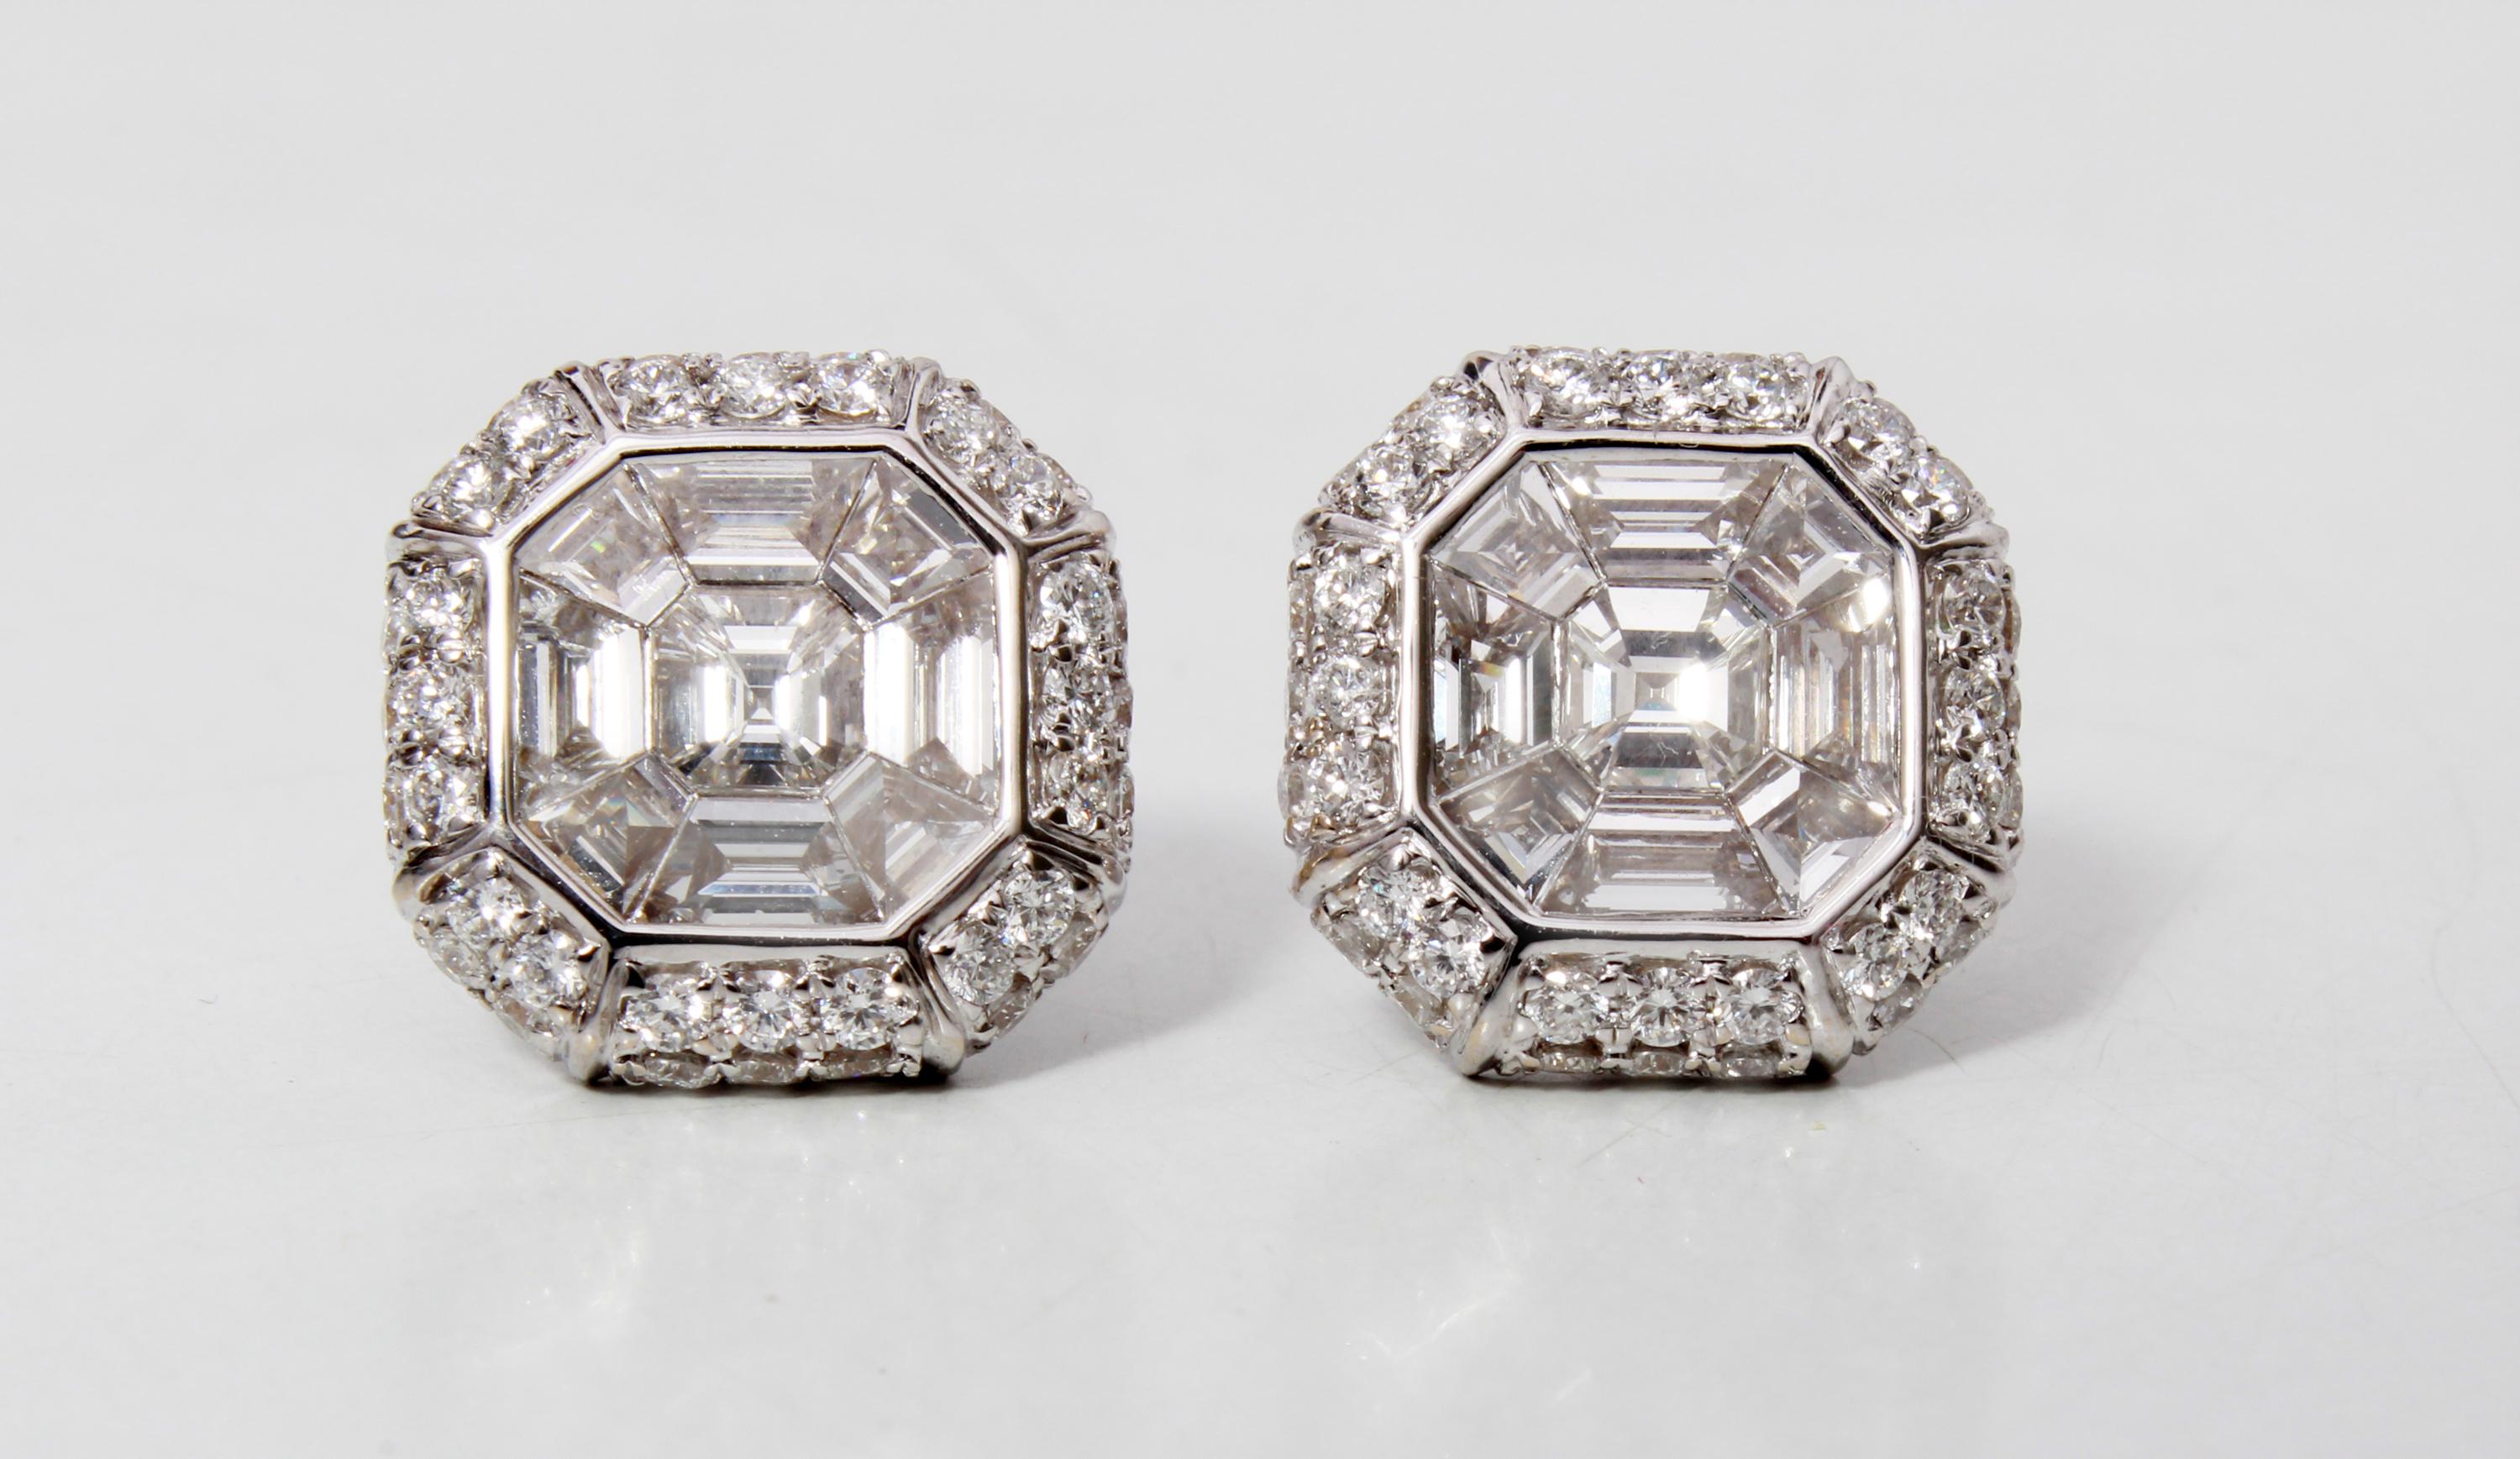 Great pair of matching diamond earrings. This pair of earrings has 18 pieces of Asscher cut diamonds which weigh 2.59 carats. With that it has 80 pieces of white round diamonds which weigh 1.36 carats. The earrings are made in 18K White Gold and